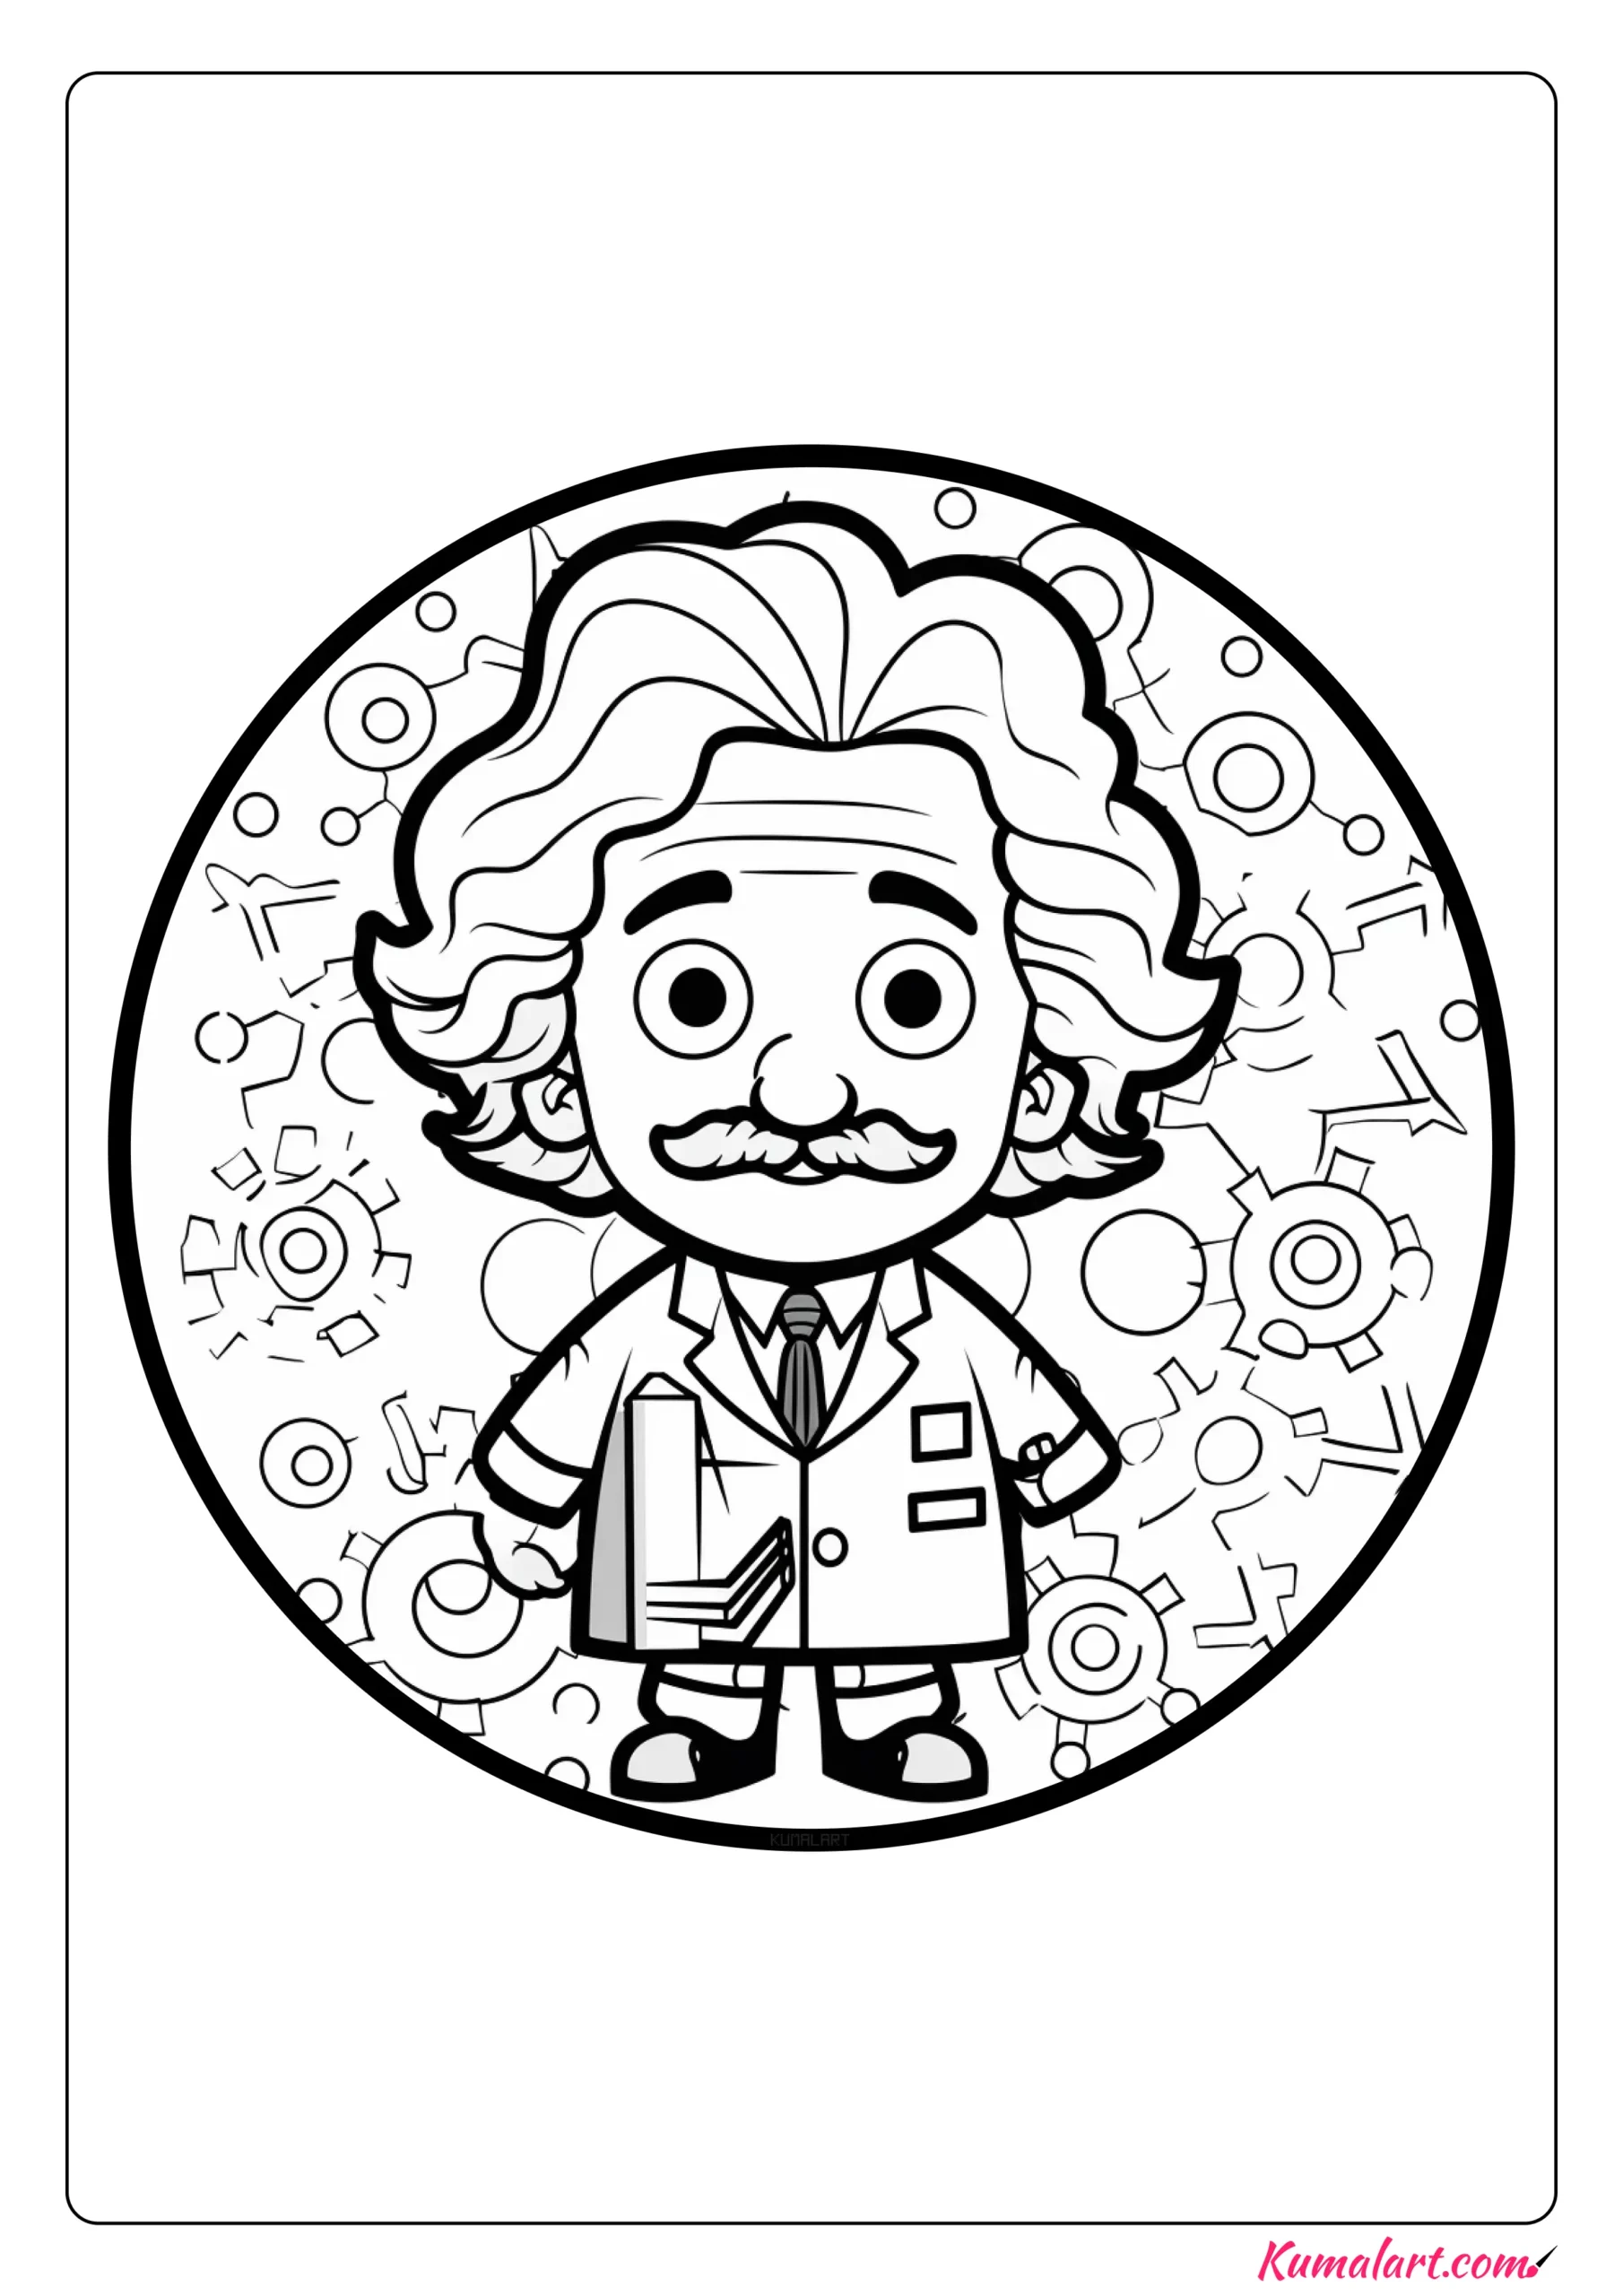 Clever Albert Einstein Coloring Page